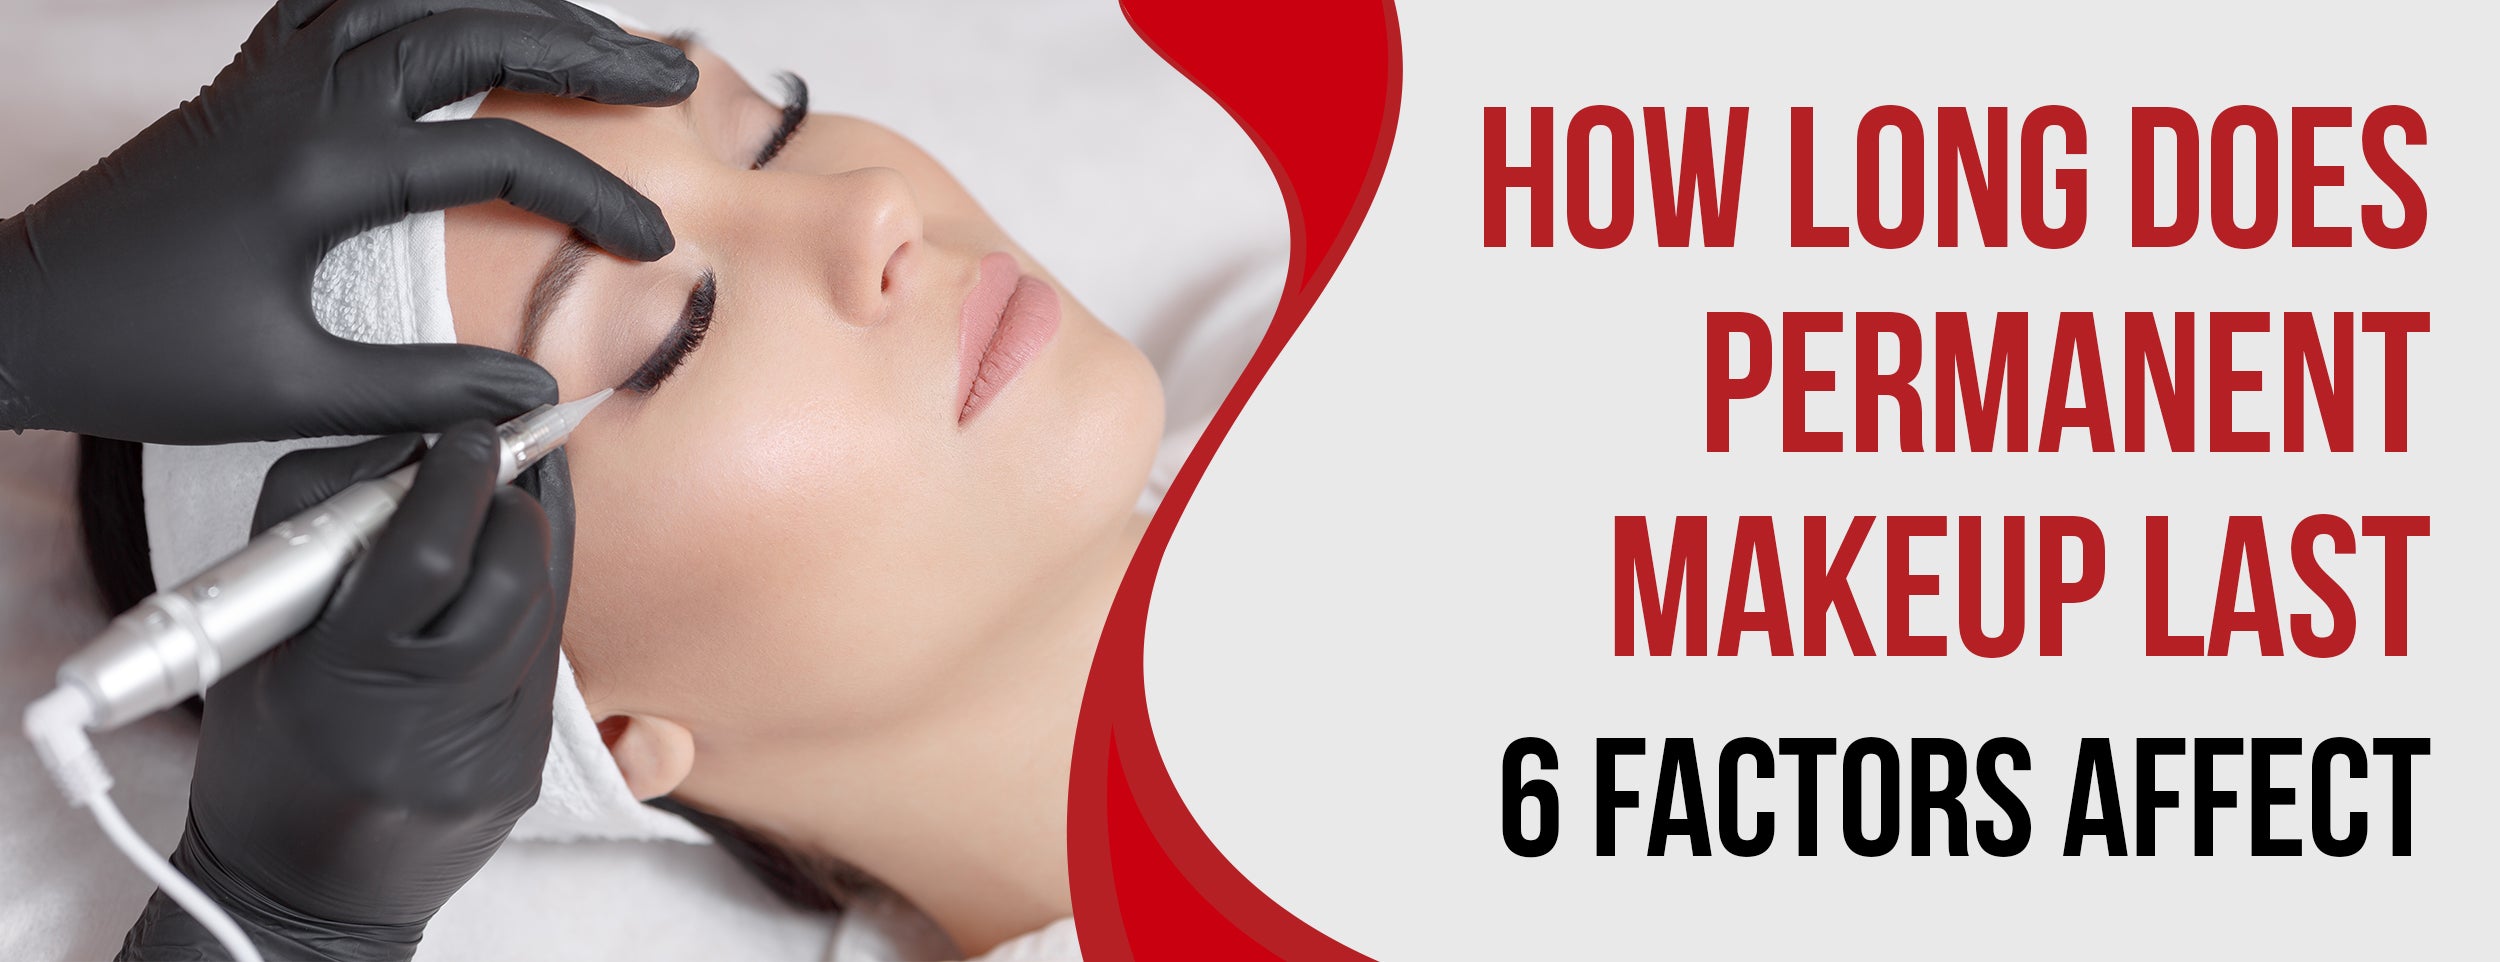 Permanent Makeup Lasts For How Long